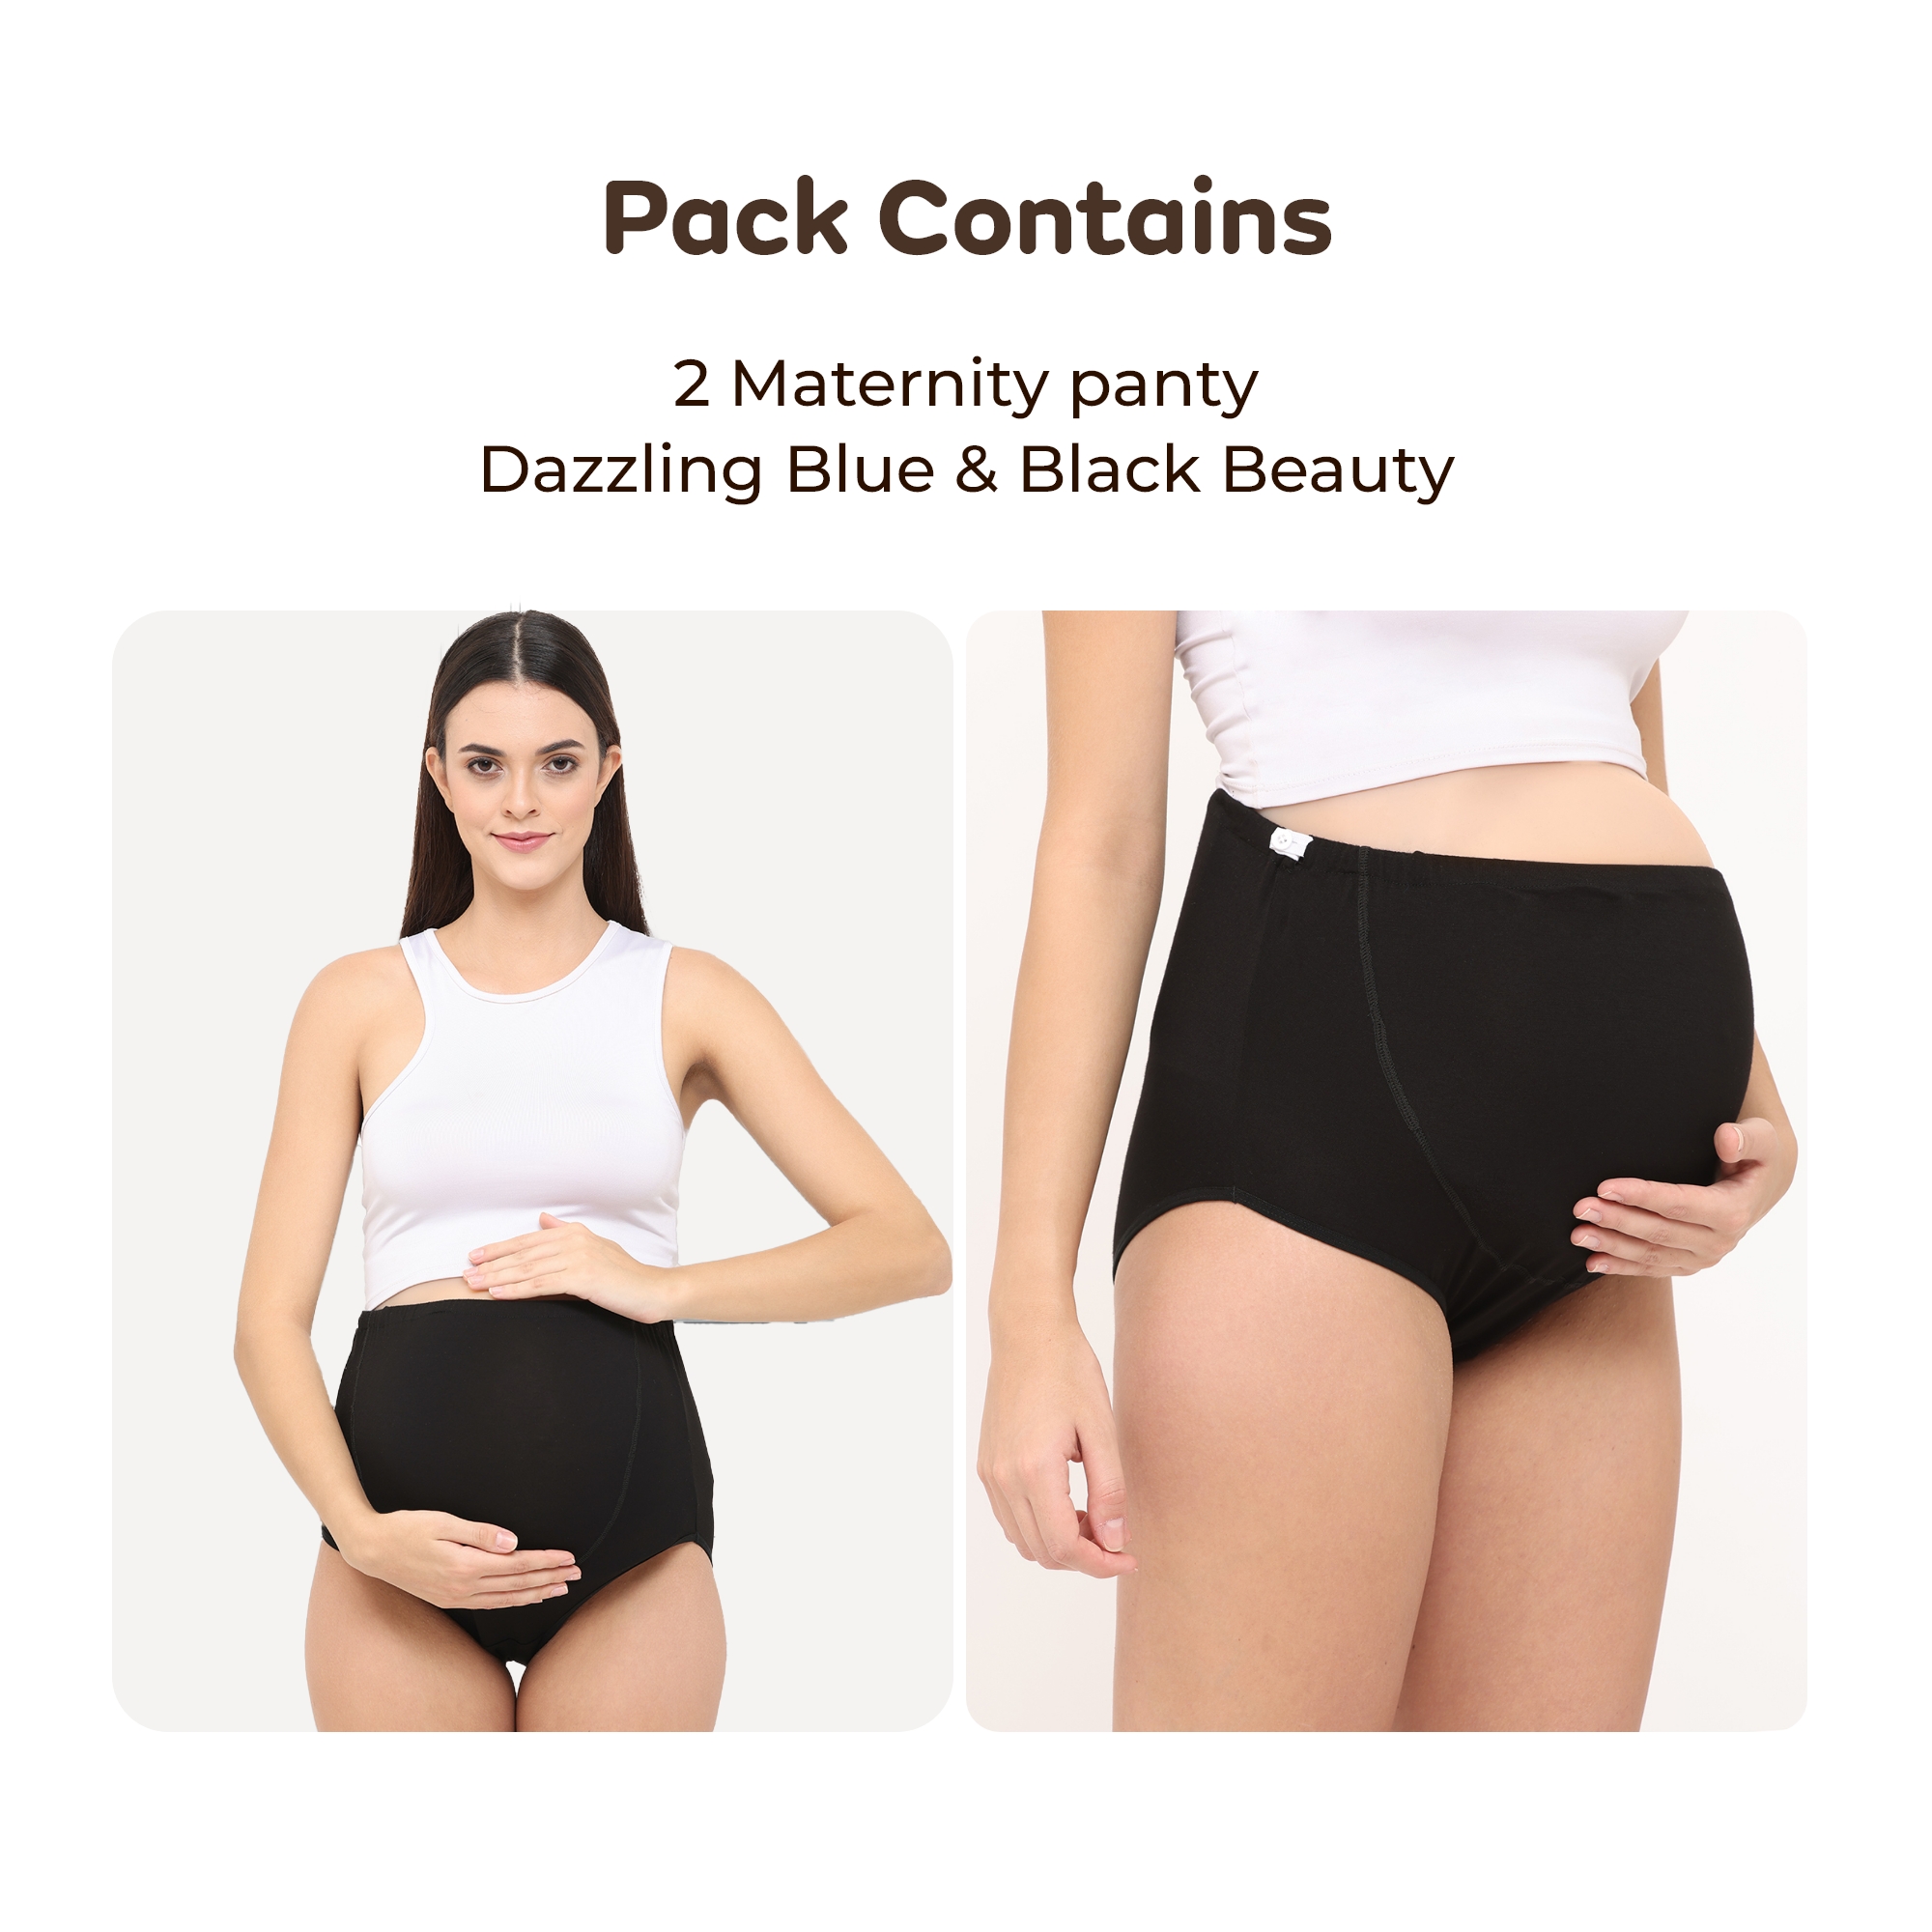 How to choose maternity underwear and pants for after birth